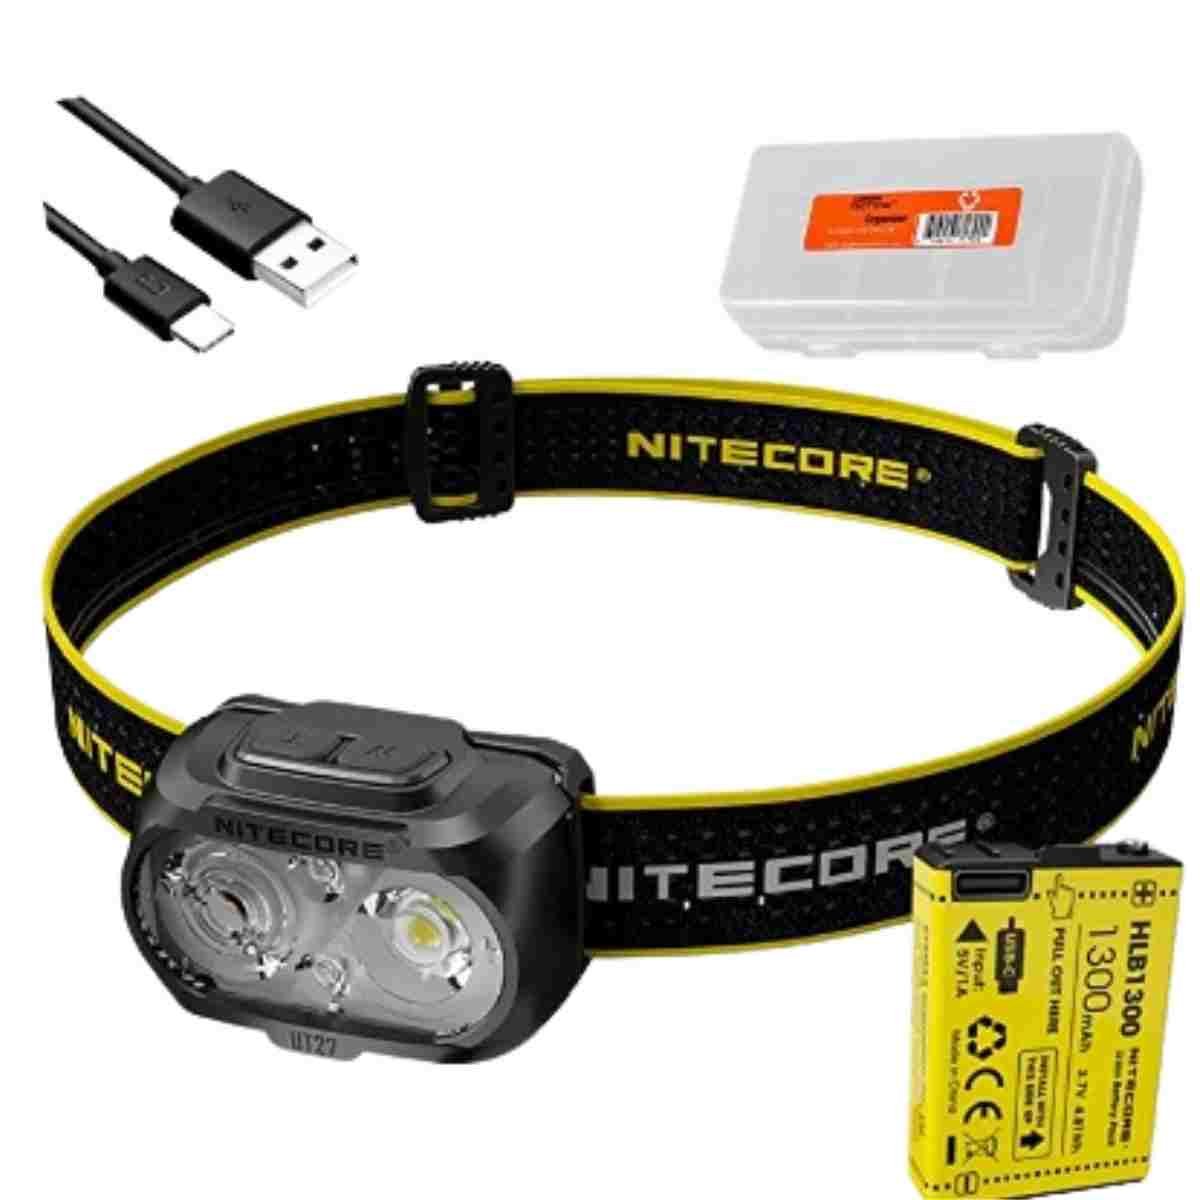  PETZL - ACTIK CORE Headlamp, 450 Lumens, Rechargeable, with  CORE Battery, Black : Sports & Outdoors